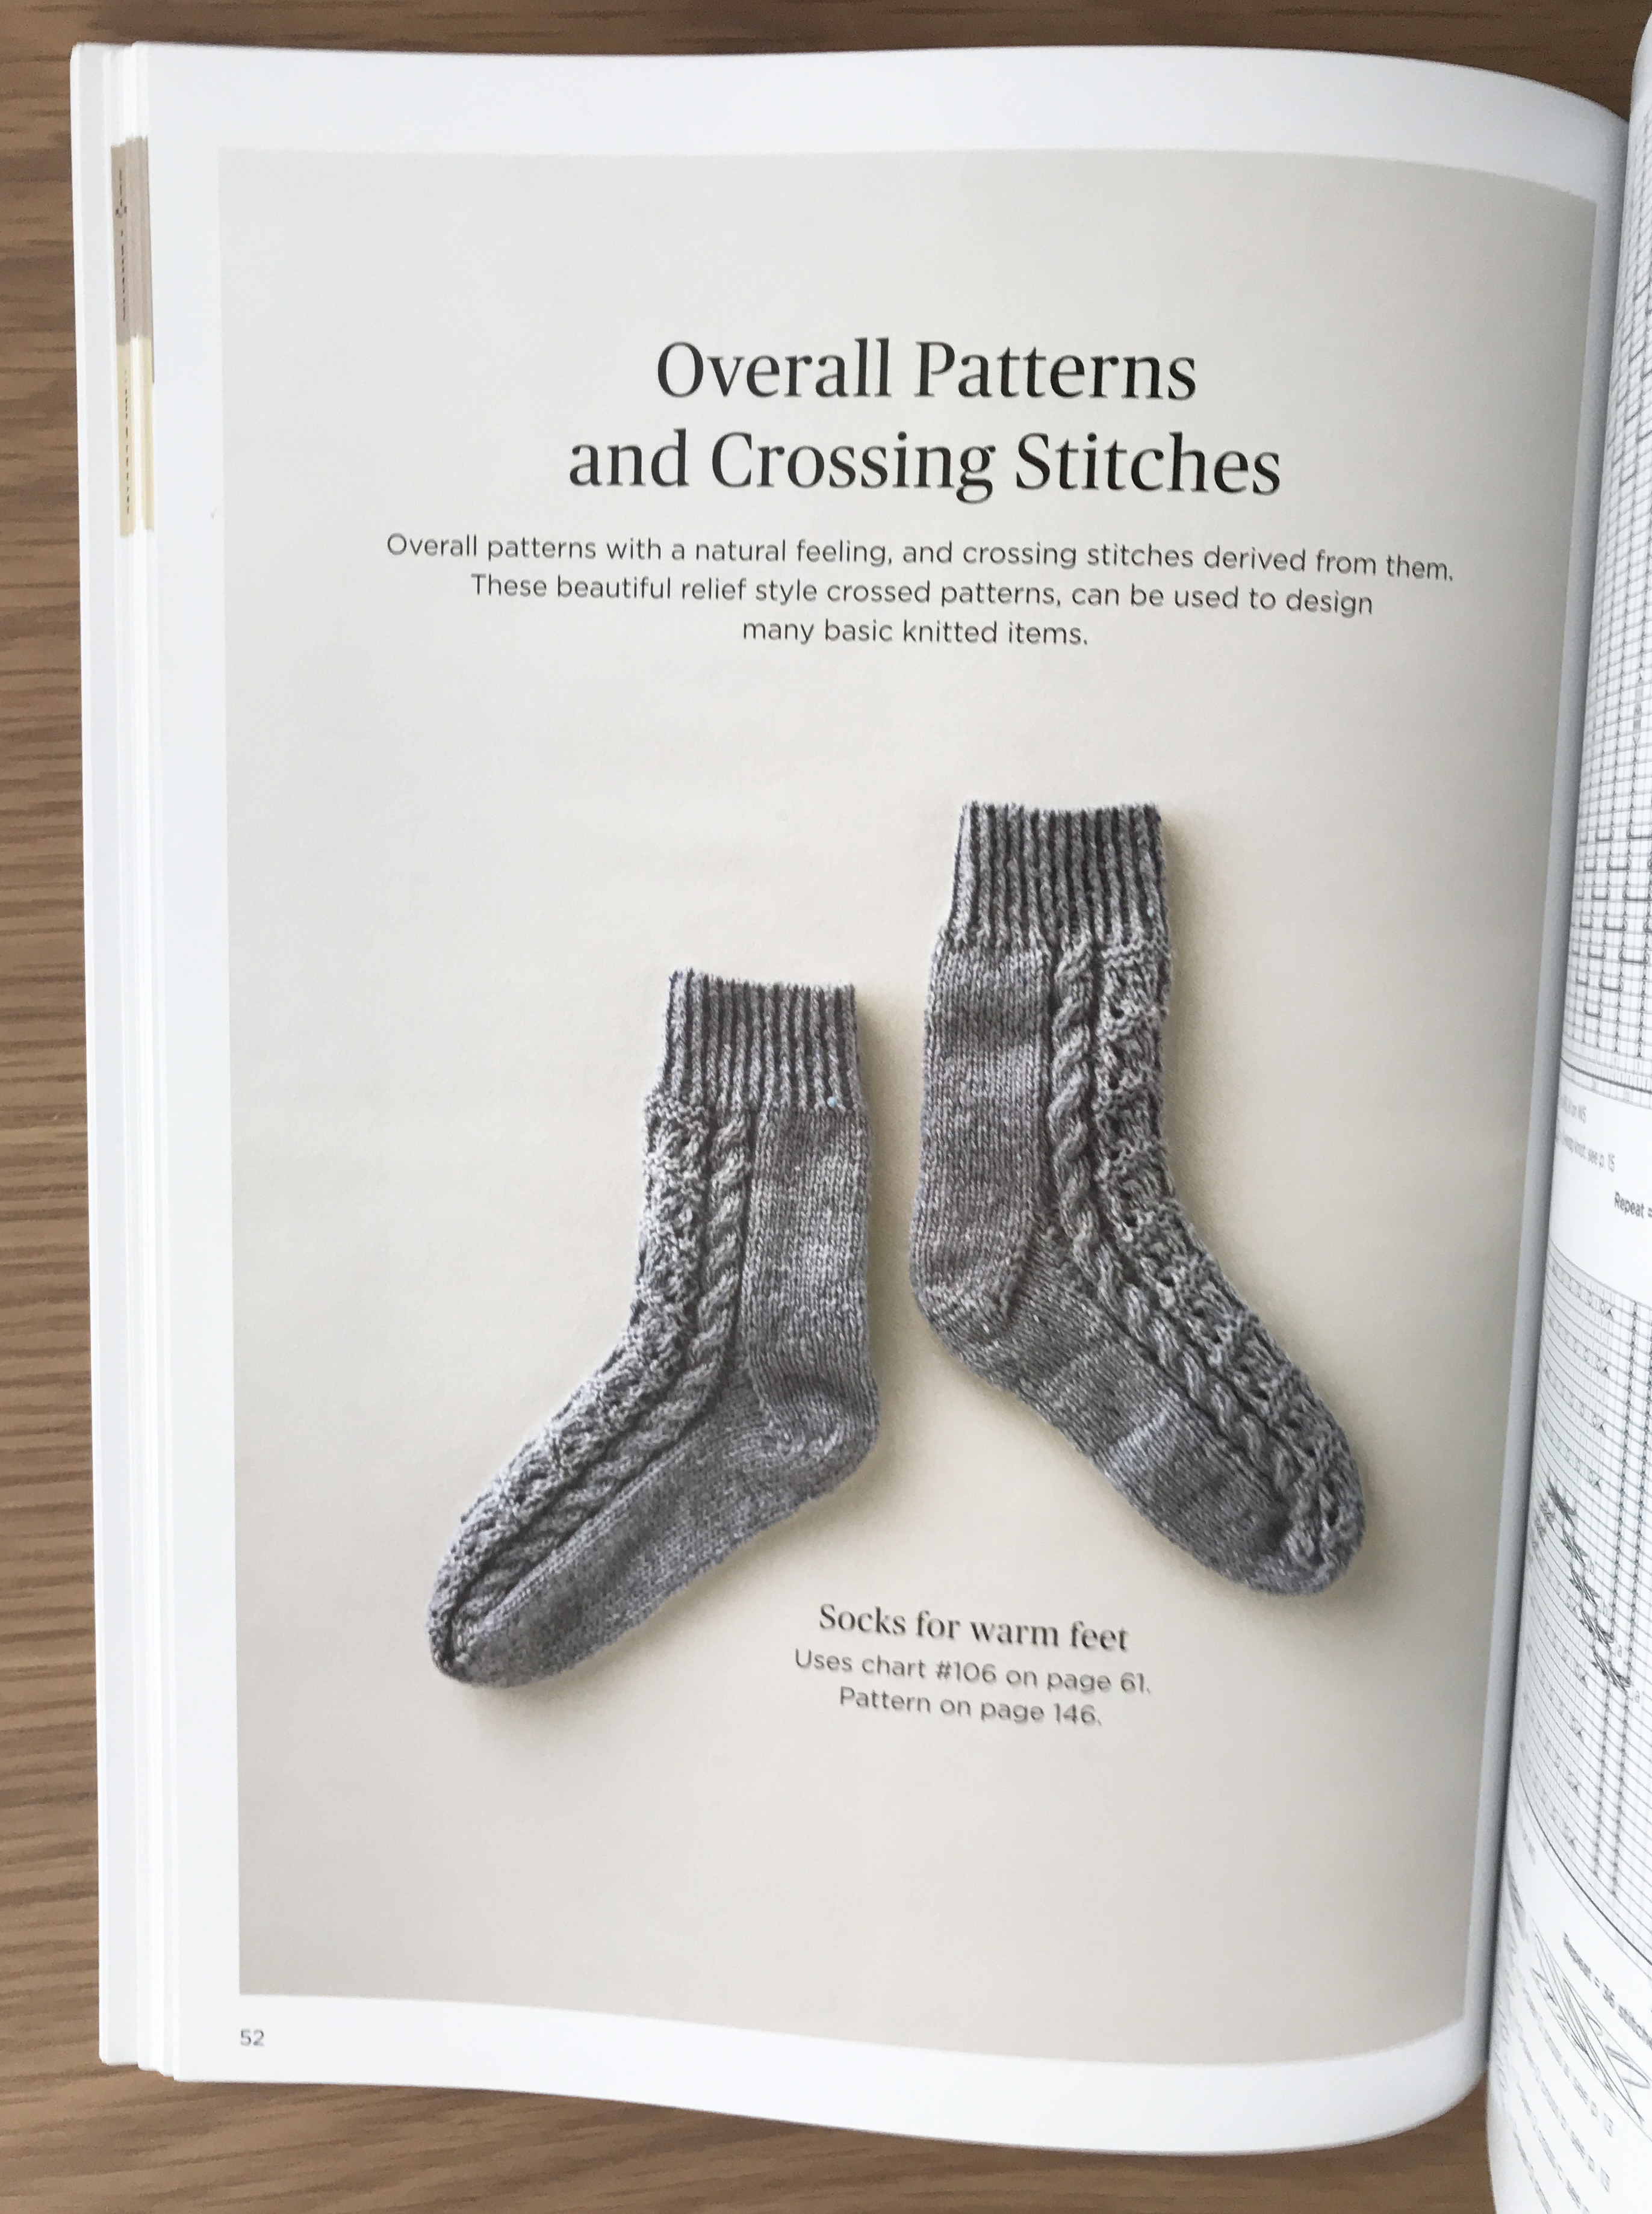 JAPANESE KNITTING STITCH BIBLE: 260 Exquisite Patterns by Hitomi Shida -  BOOK REVIEW 